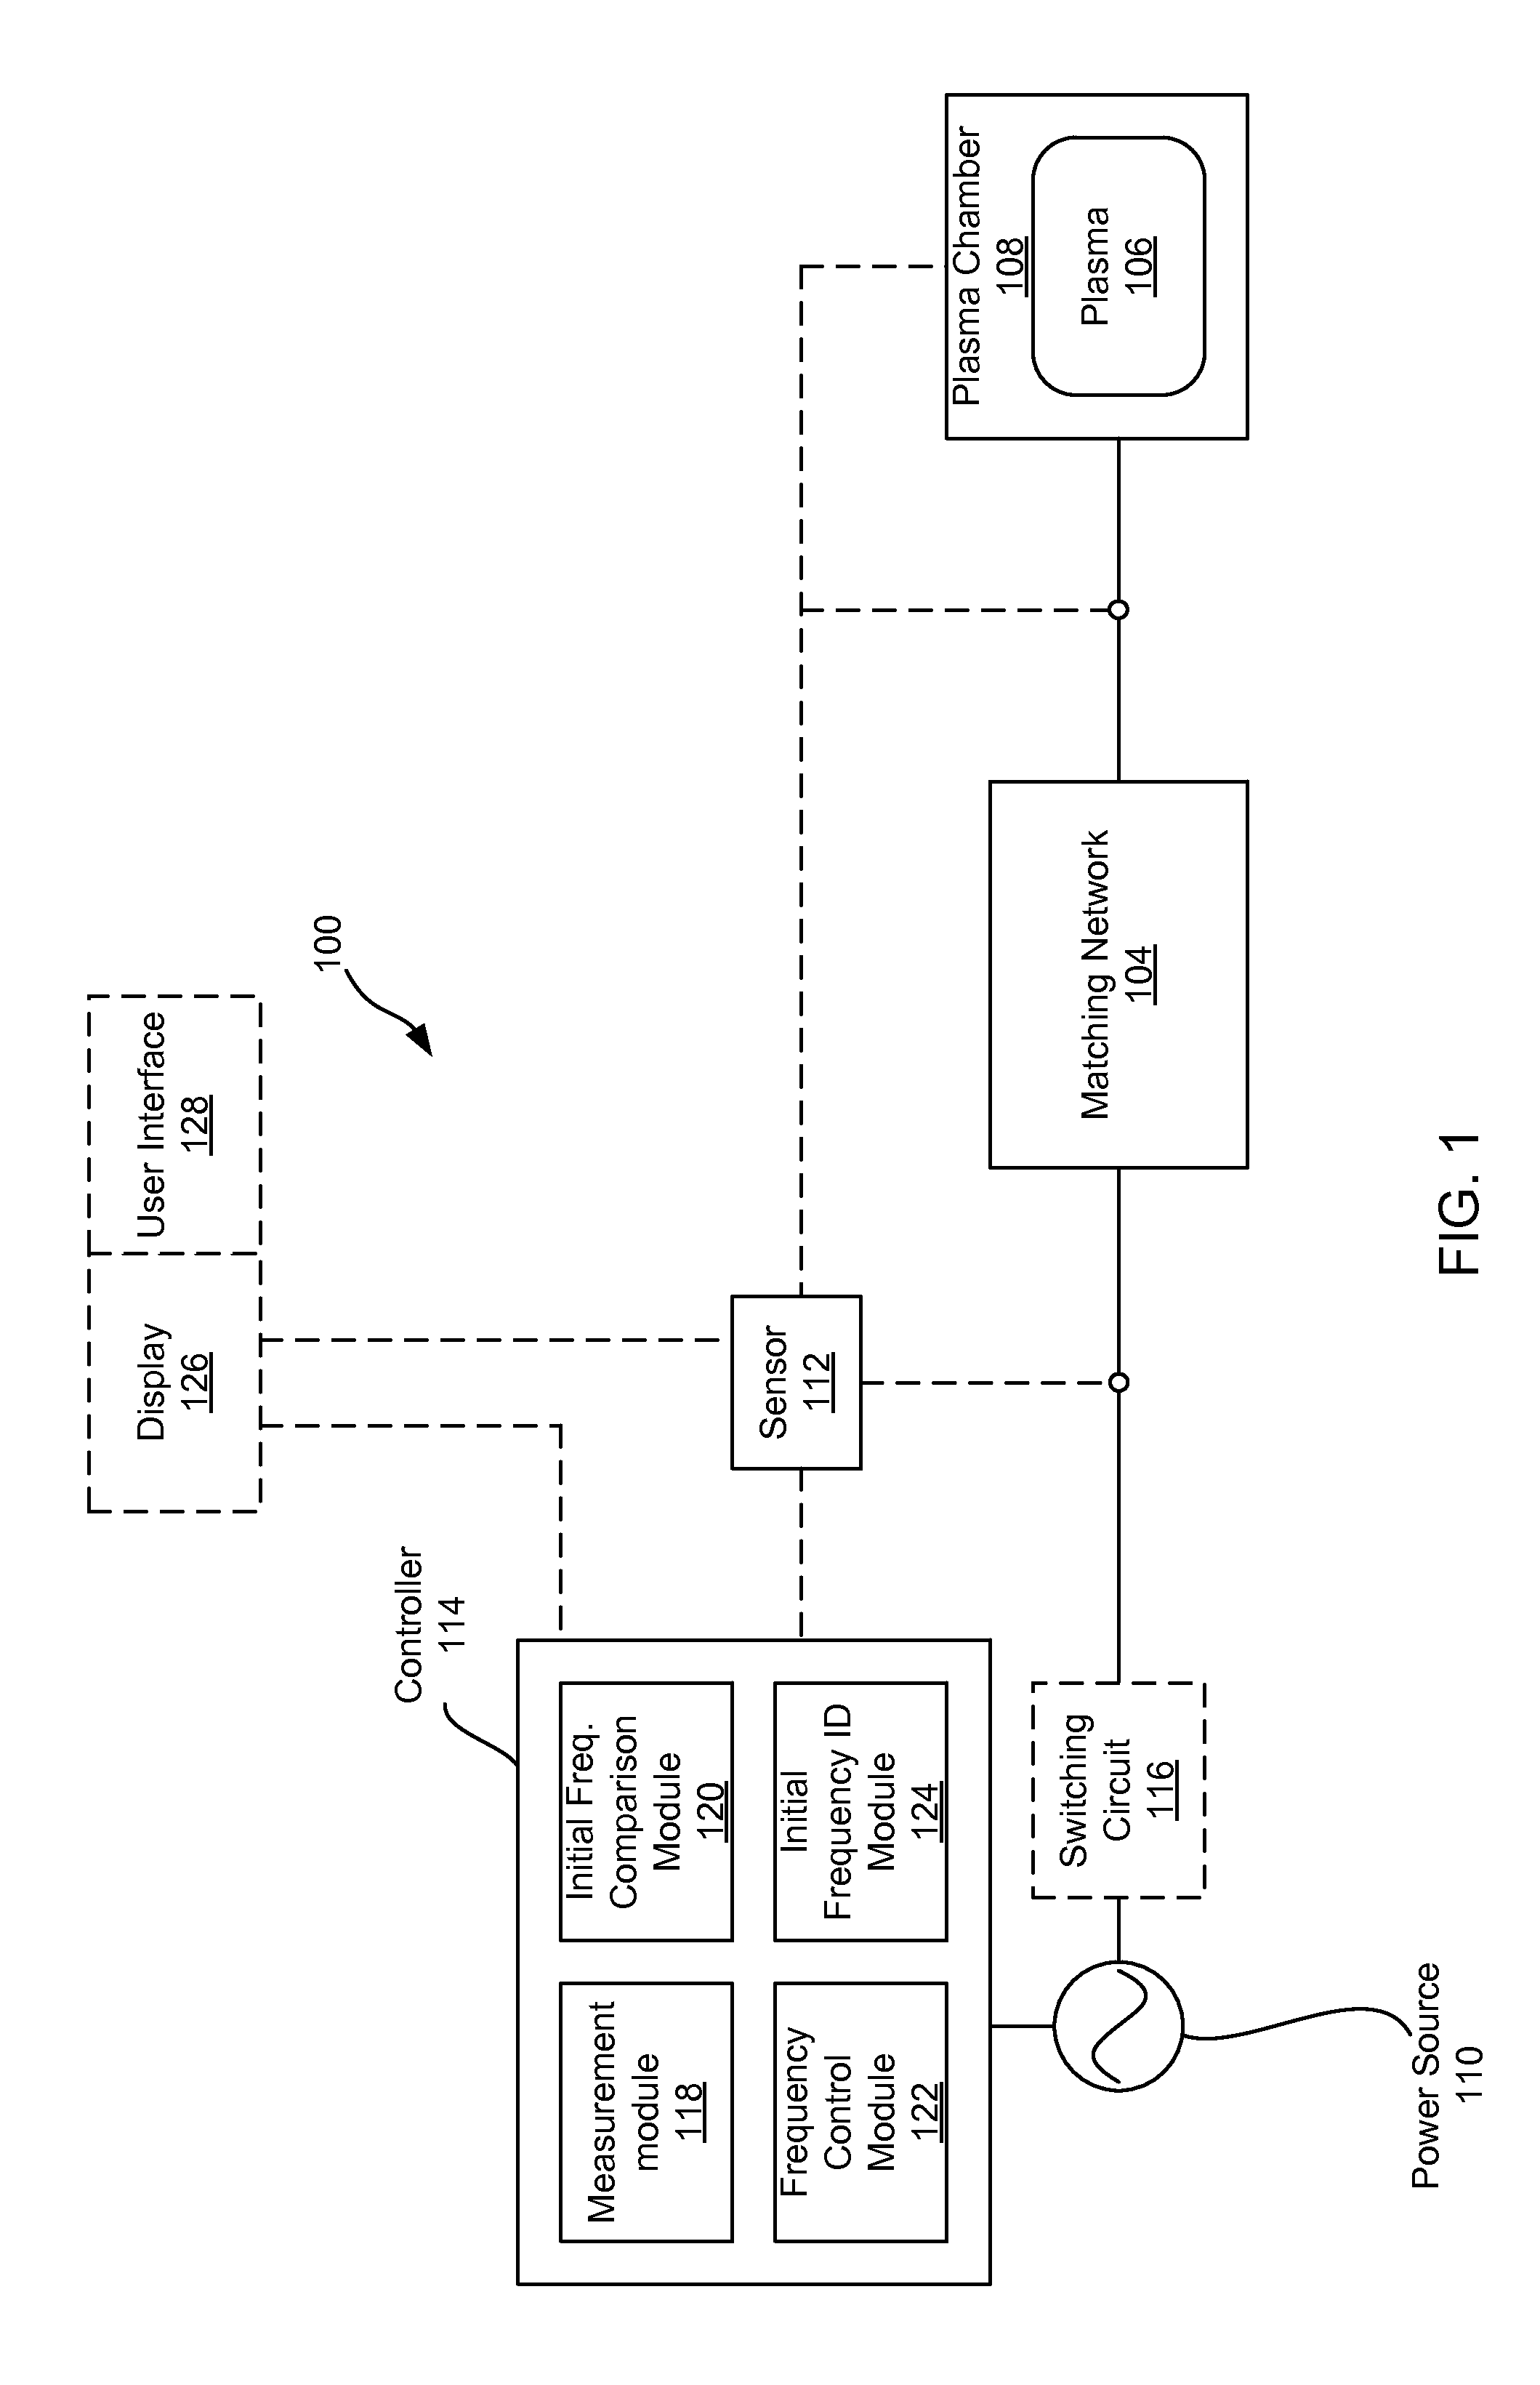 Frequency tuning for pulsed radio frequency plasma processing